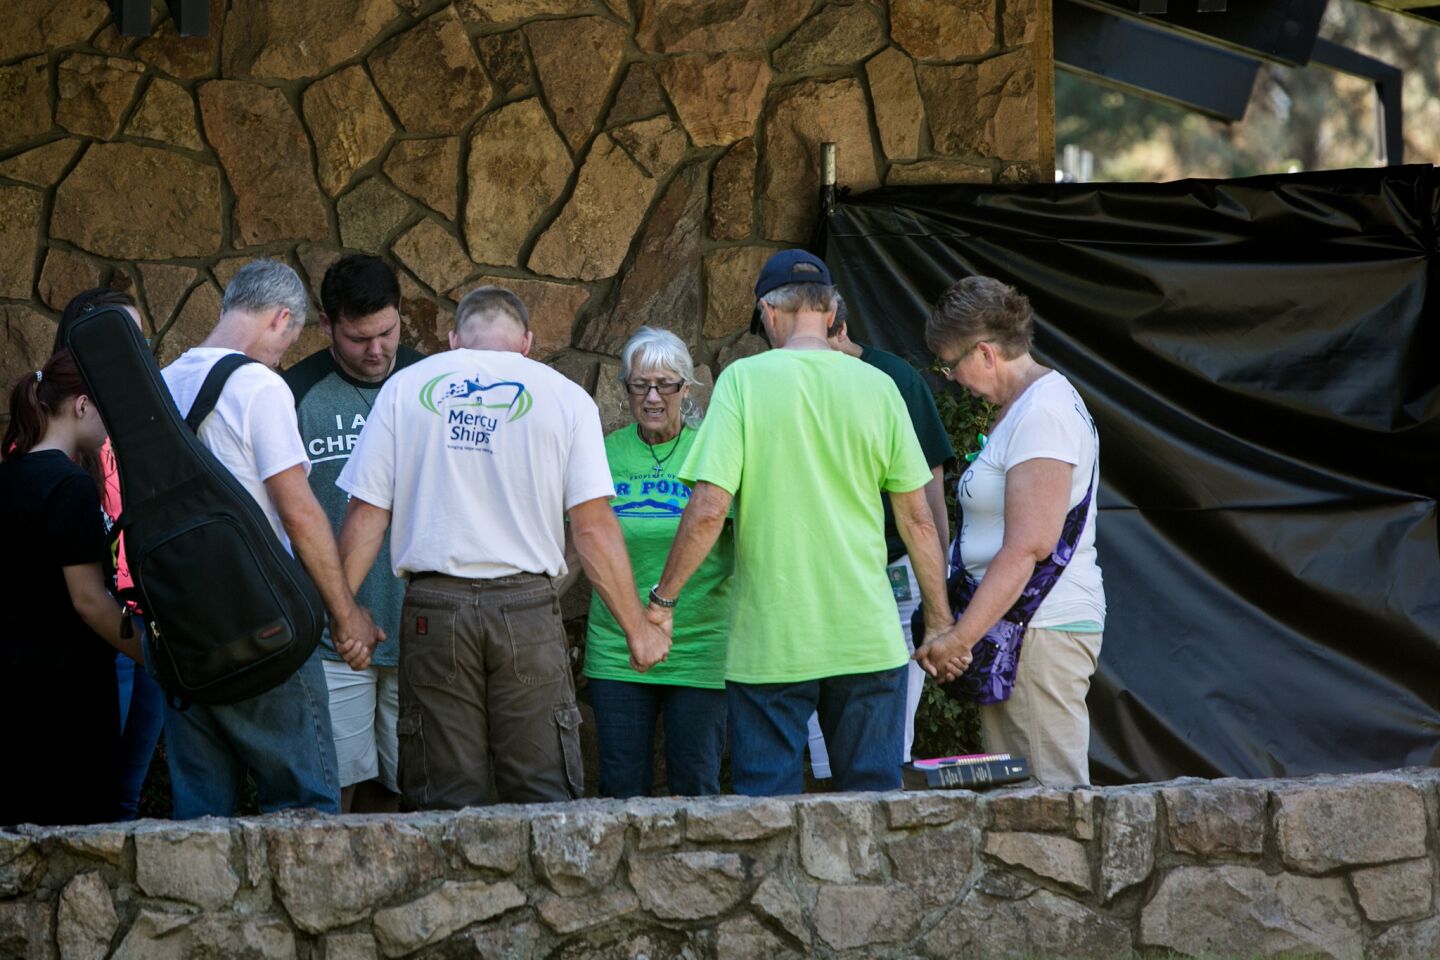 A prayer circle is held Oct. 5 at Snyder Hall, the site of the Umpqua Community College mass shooting.